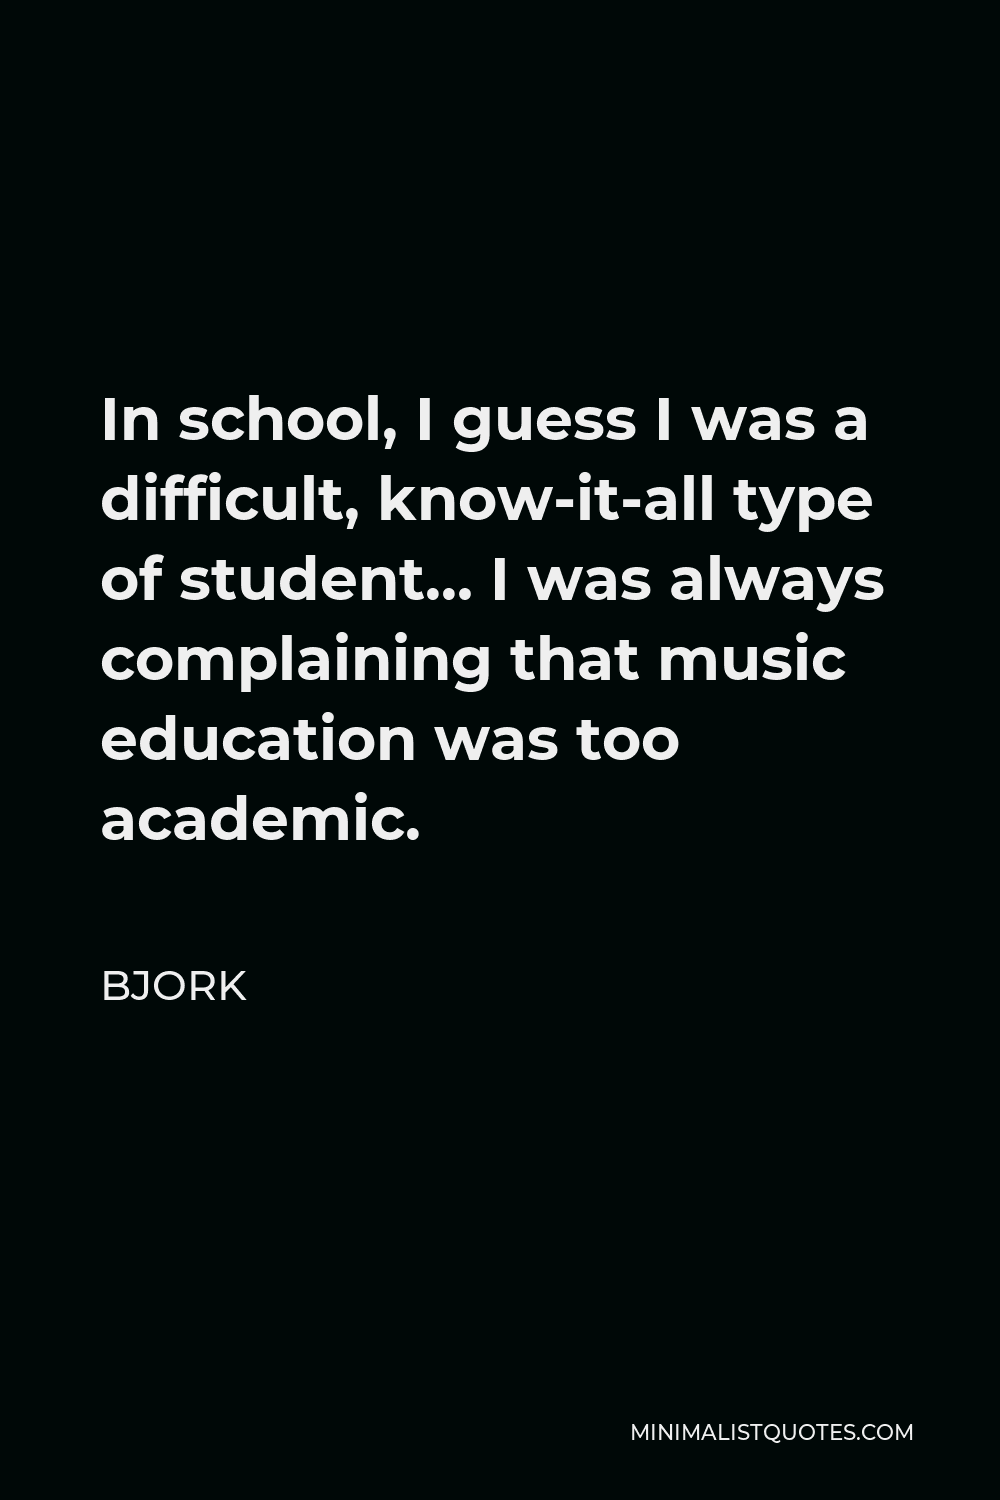 Bjork Quote - In school, I guess I was a difficult, know-it-all type of student… I was always complaining that music education was too academic.